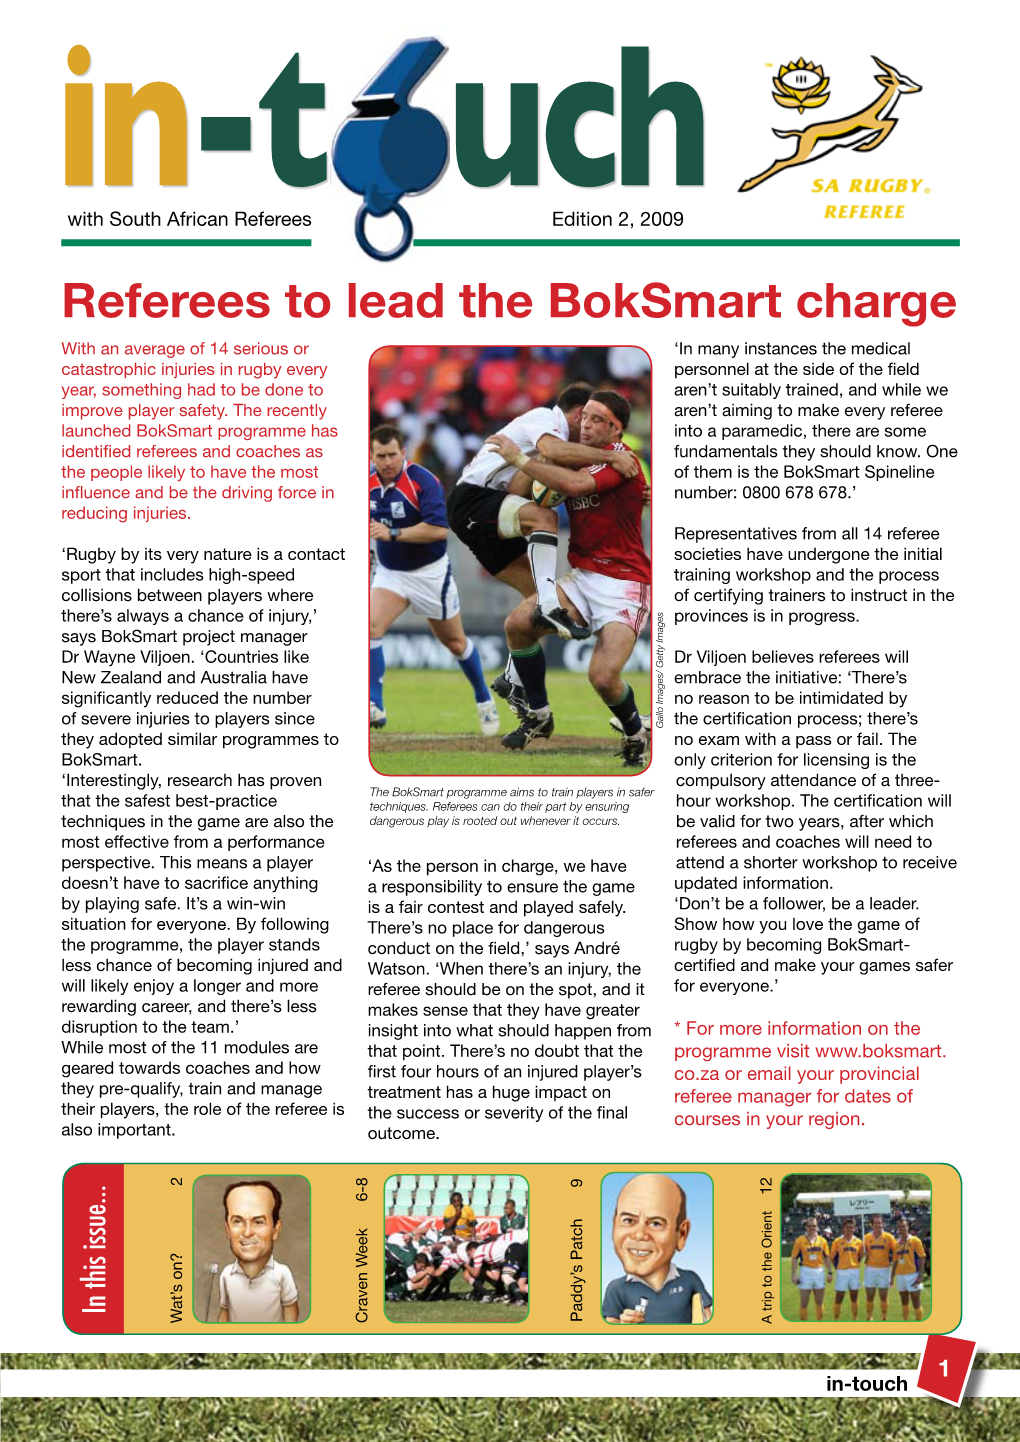 Referees to Lead the Boksmart Charge